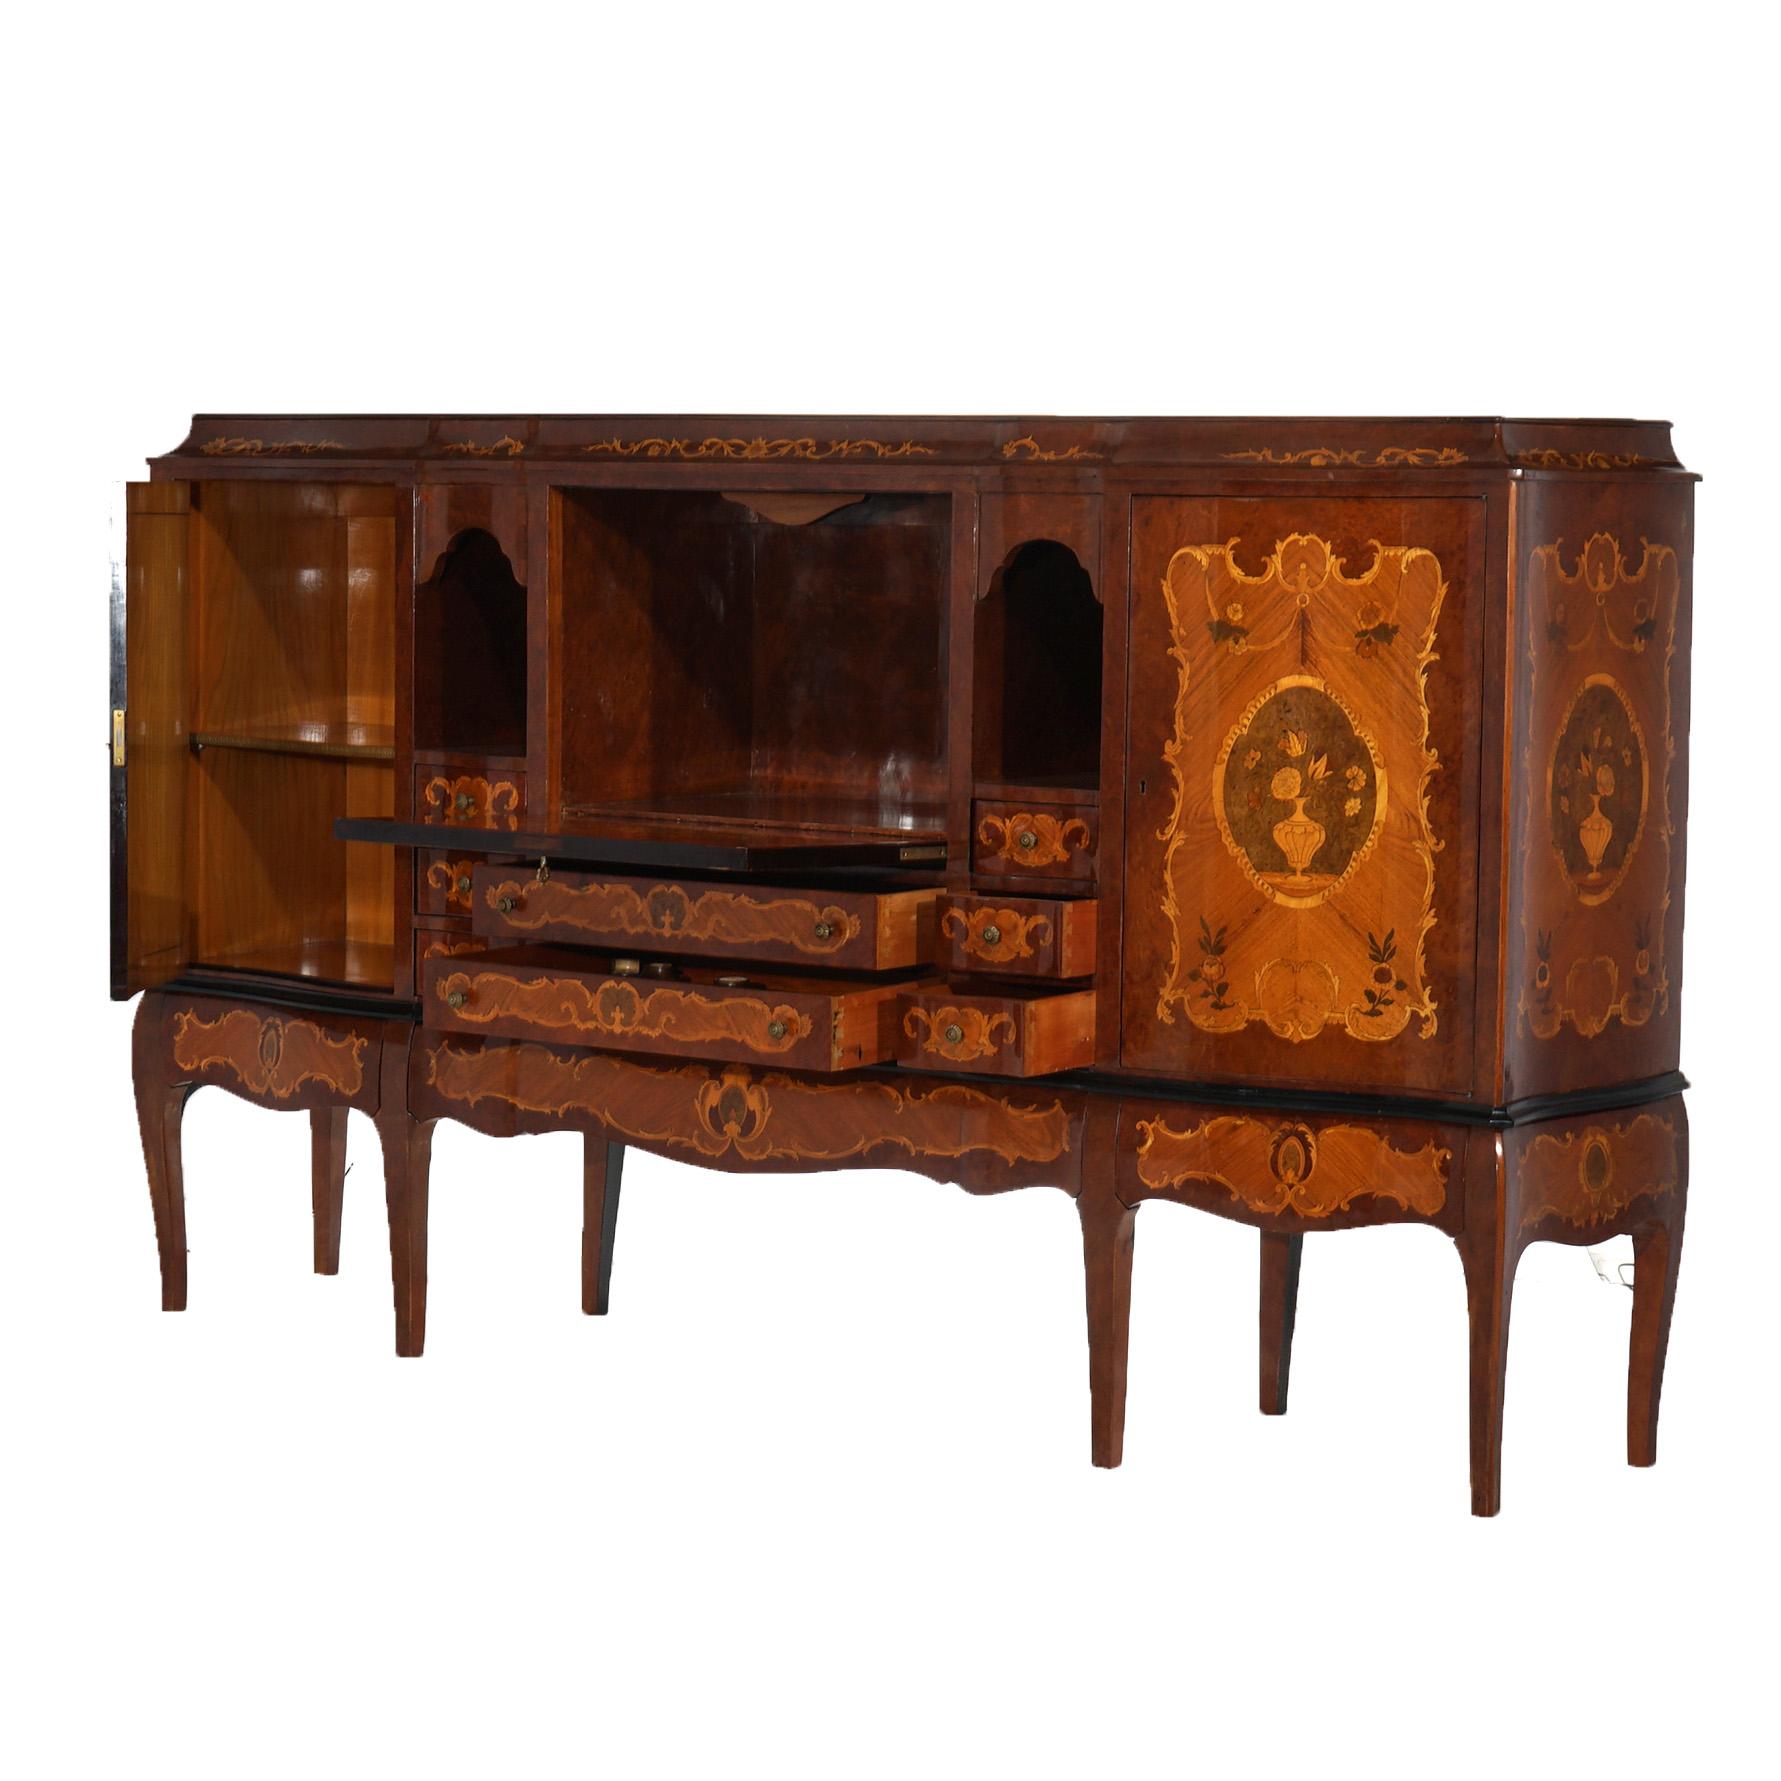 Antique French Kingwood Satinwood & Burlwood Marquetry Inlaid Sideboard C1930 In Good Condition For Sale In Big Flats, NY